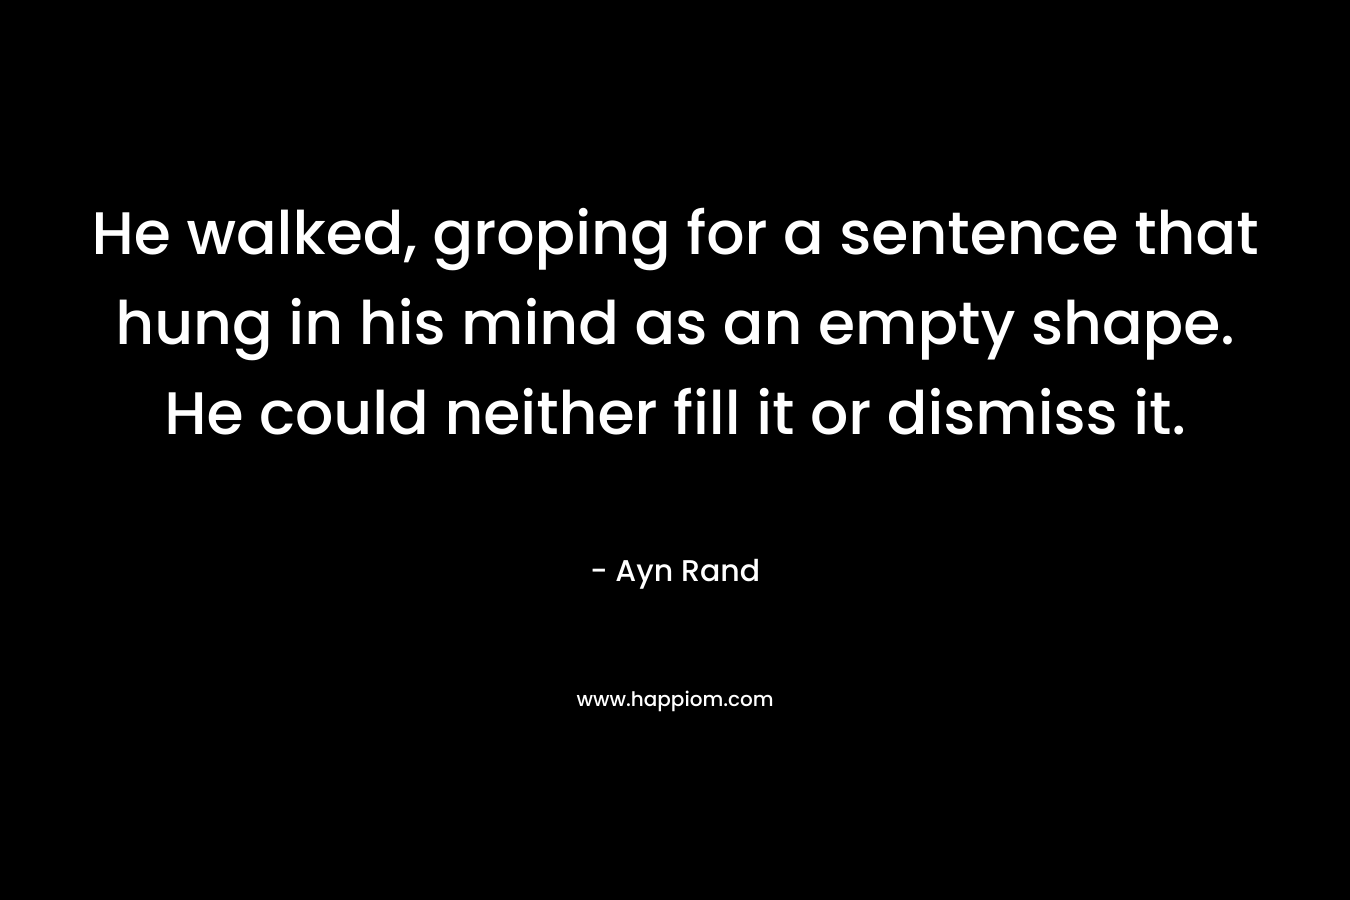 He walked, groping for a sentence that hung in his mind as an empty shape. He could neither fill it or dismiss it. – Ayn Rand